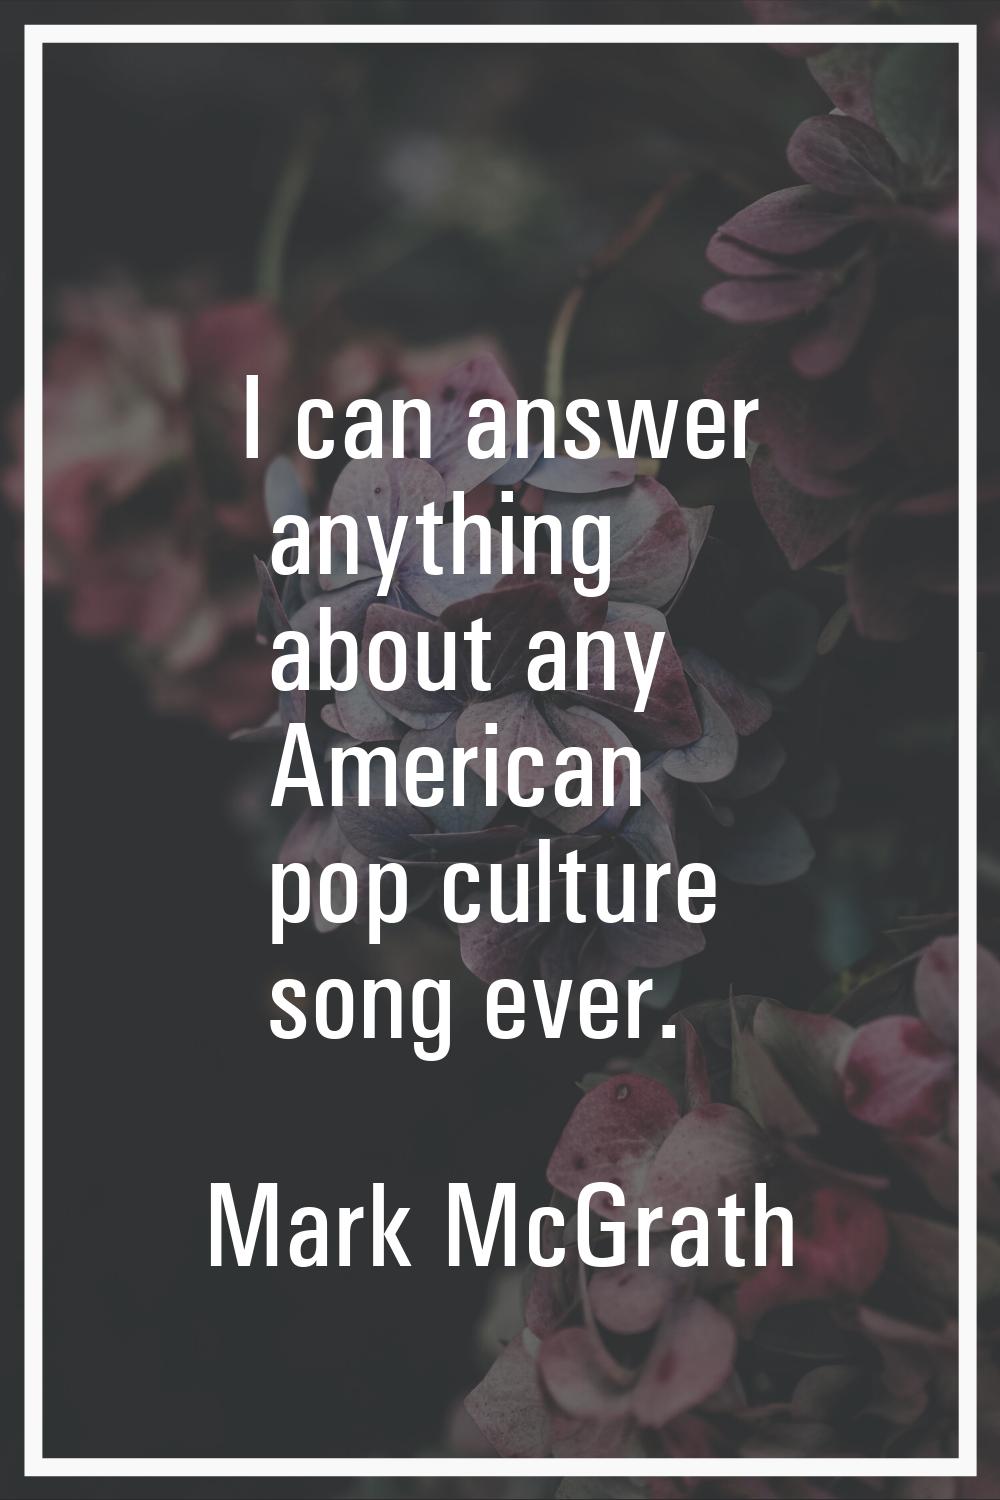 I can answer anything about any American pop culture song ever.